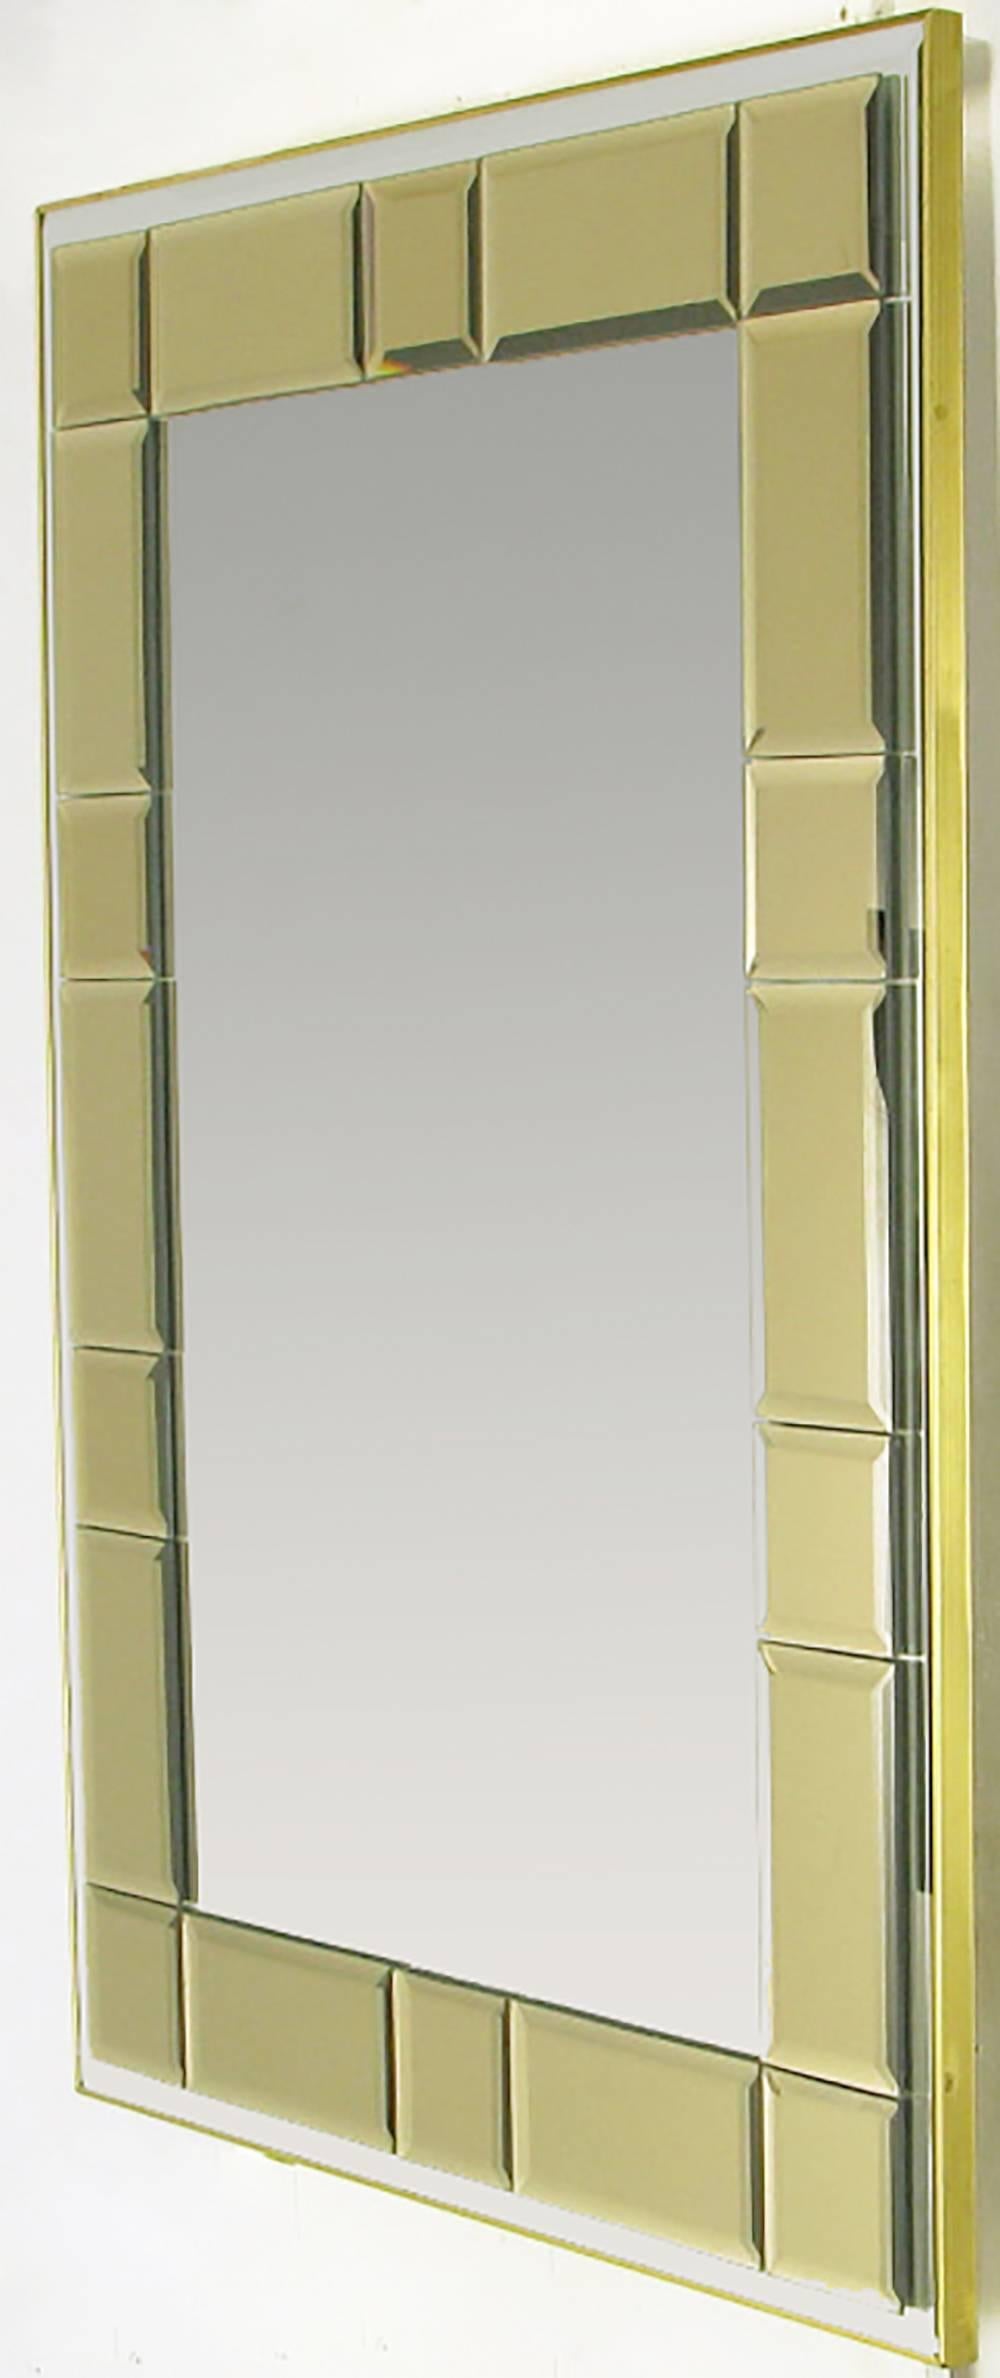 Striking and distinctive, this Labarge mirror is clad in a simple brass anodized aluminum frame, with the beveled mirror surrounded by a beveled and smoked mirrored mosaic border. It can be hung vertically or horizontally.